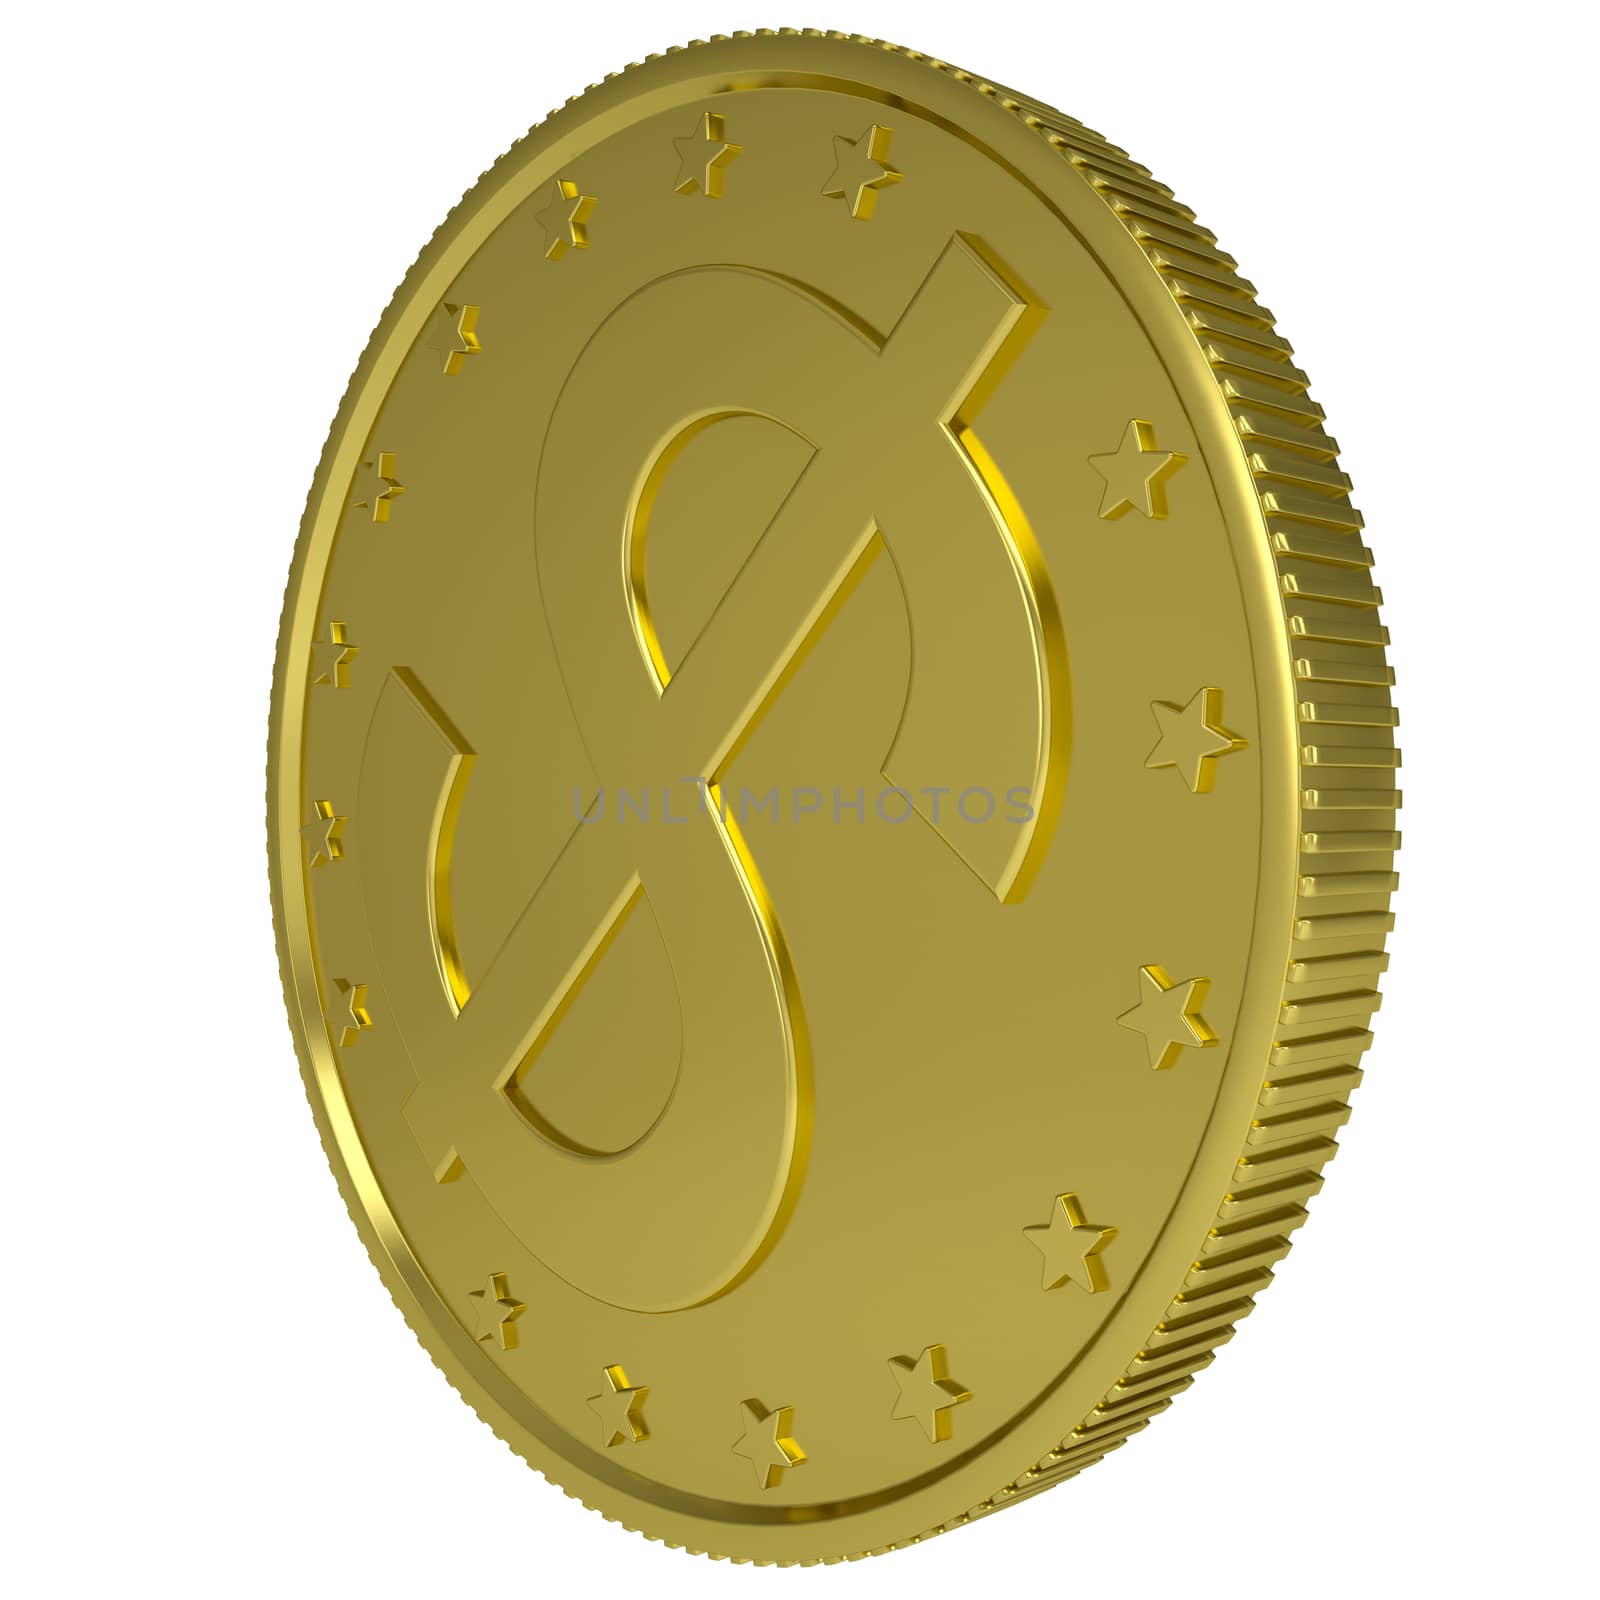 Gold dollar. Isolated render on a white background